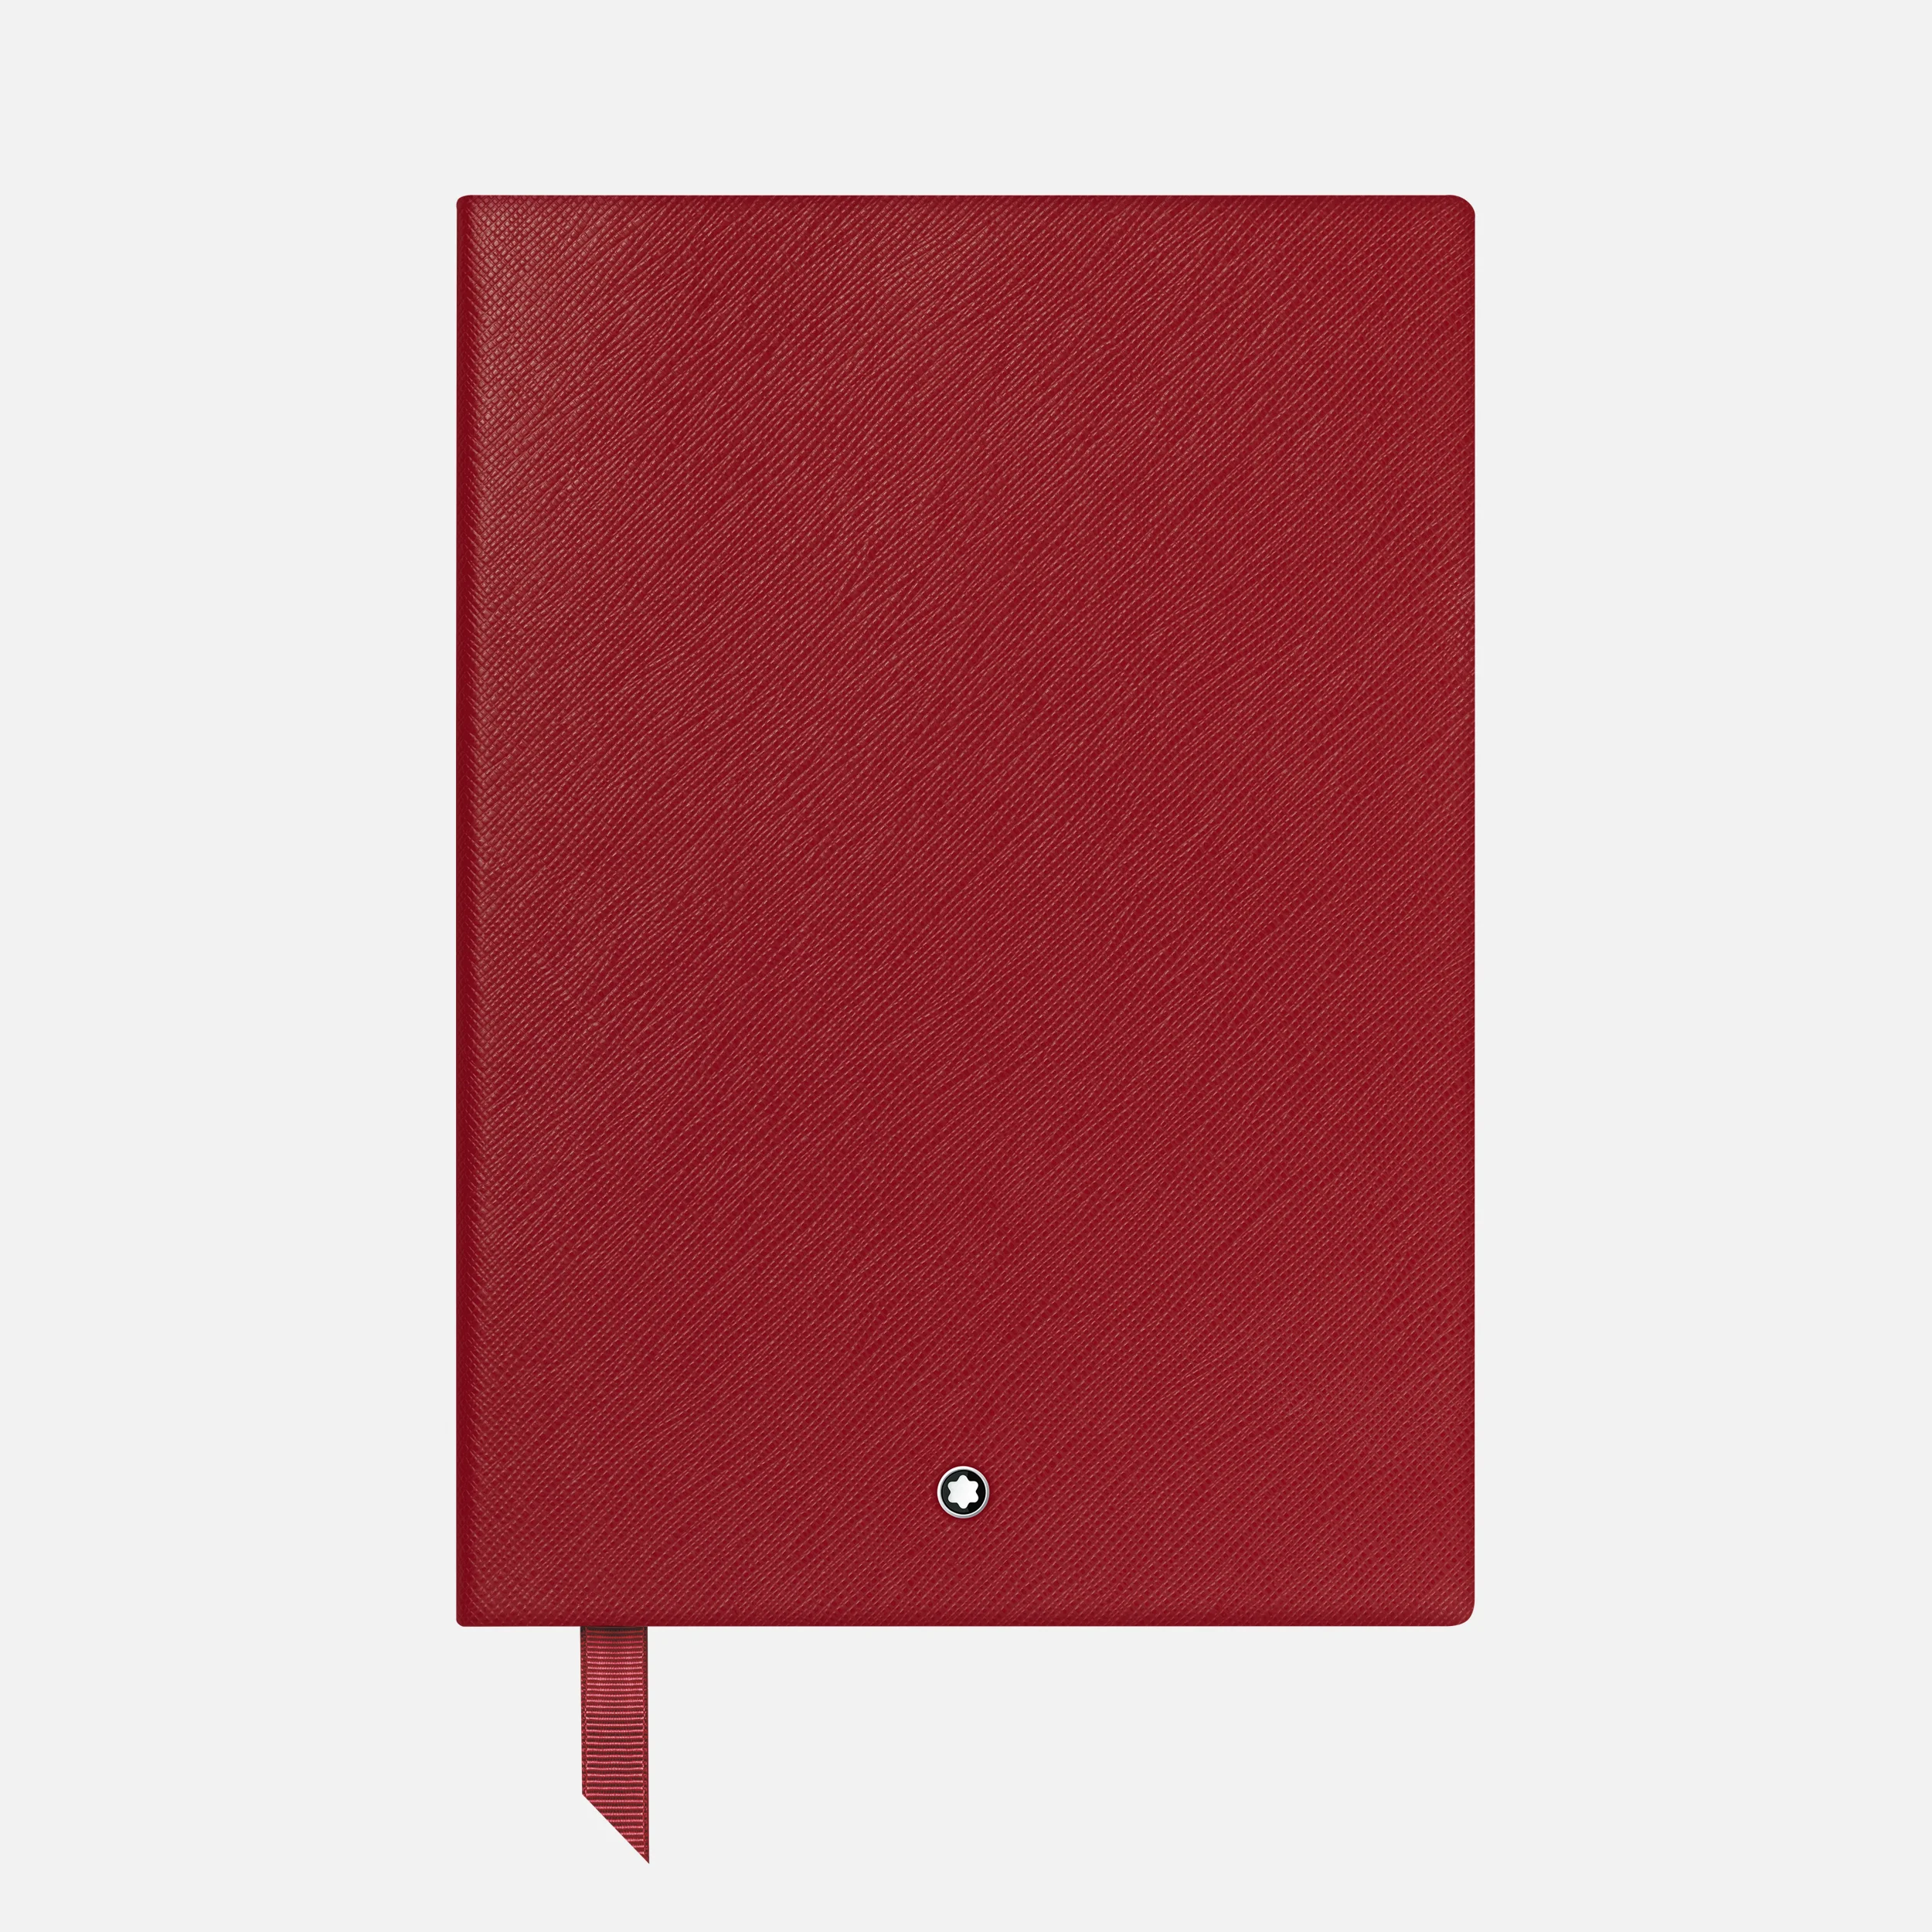 Montblanc Fine Stationery Notebook 146 Red Lined - Pencraft the boutique